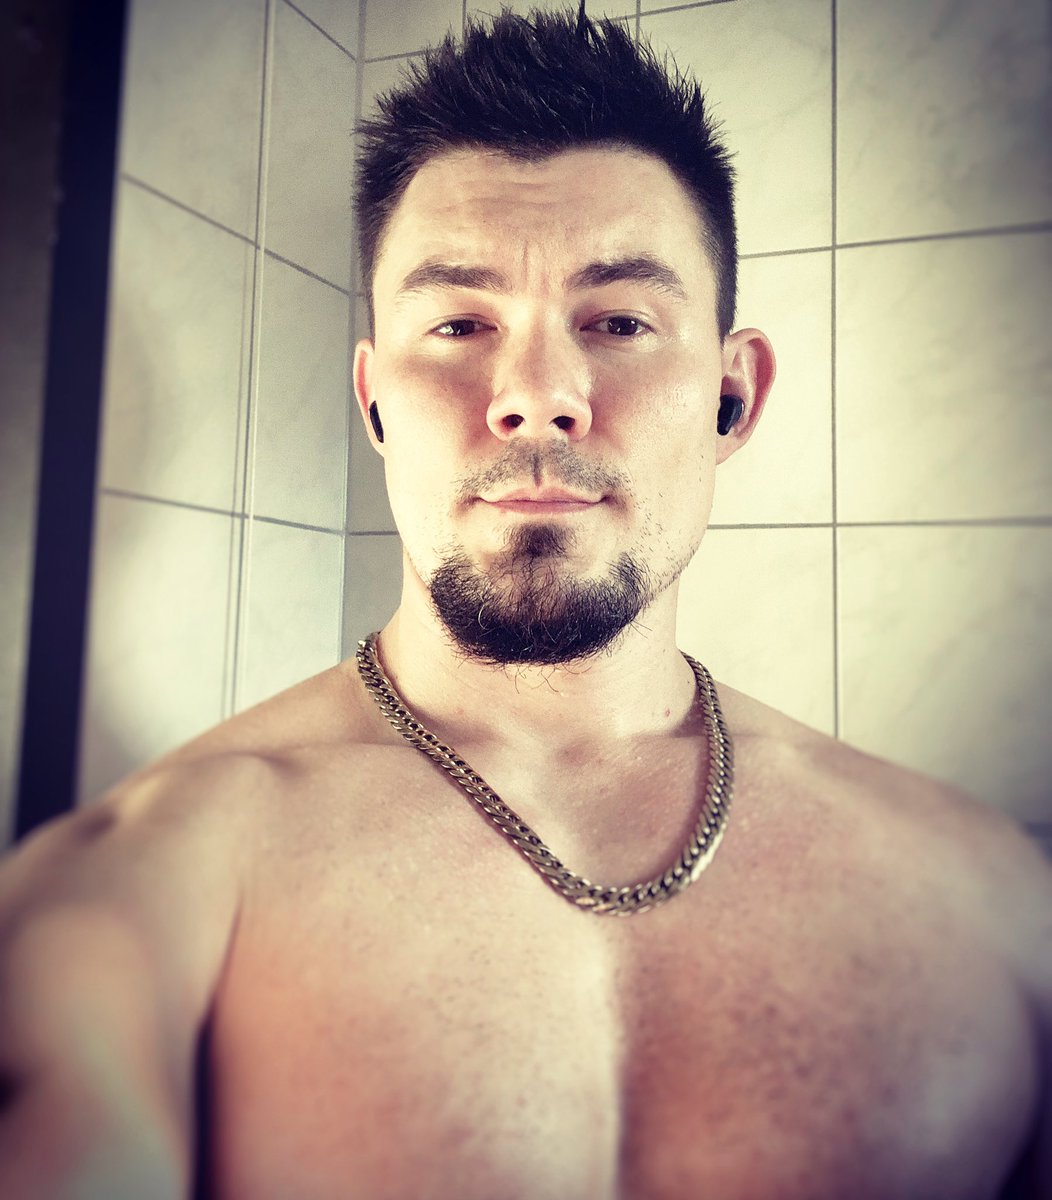 Chest day v.1 before gym  #bodybuildingnation #bodybuilding #chest #handsome #afterworkout #naked #man #menswear #menstyle #menaccessories #sport #workoutinspiration #workoutchallenge #workout #handsomeboy #casa #blogger #photography #style #instadaily #picoftheday #picofthedays